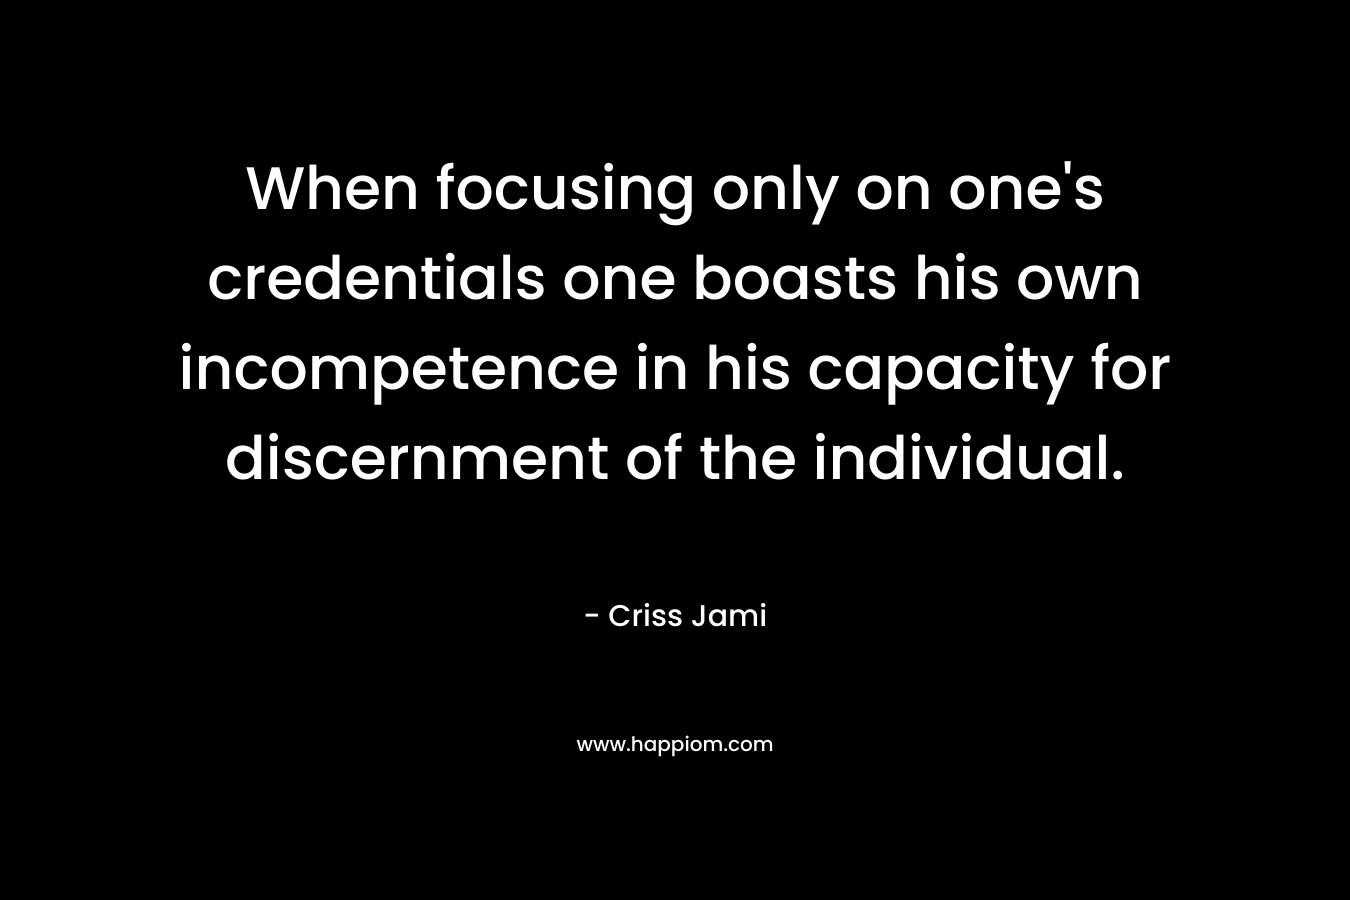 When focusing only on one’s credentials one boasts his own incompetence in his capacity for discernment of the individual. – Criss Jami